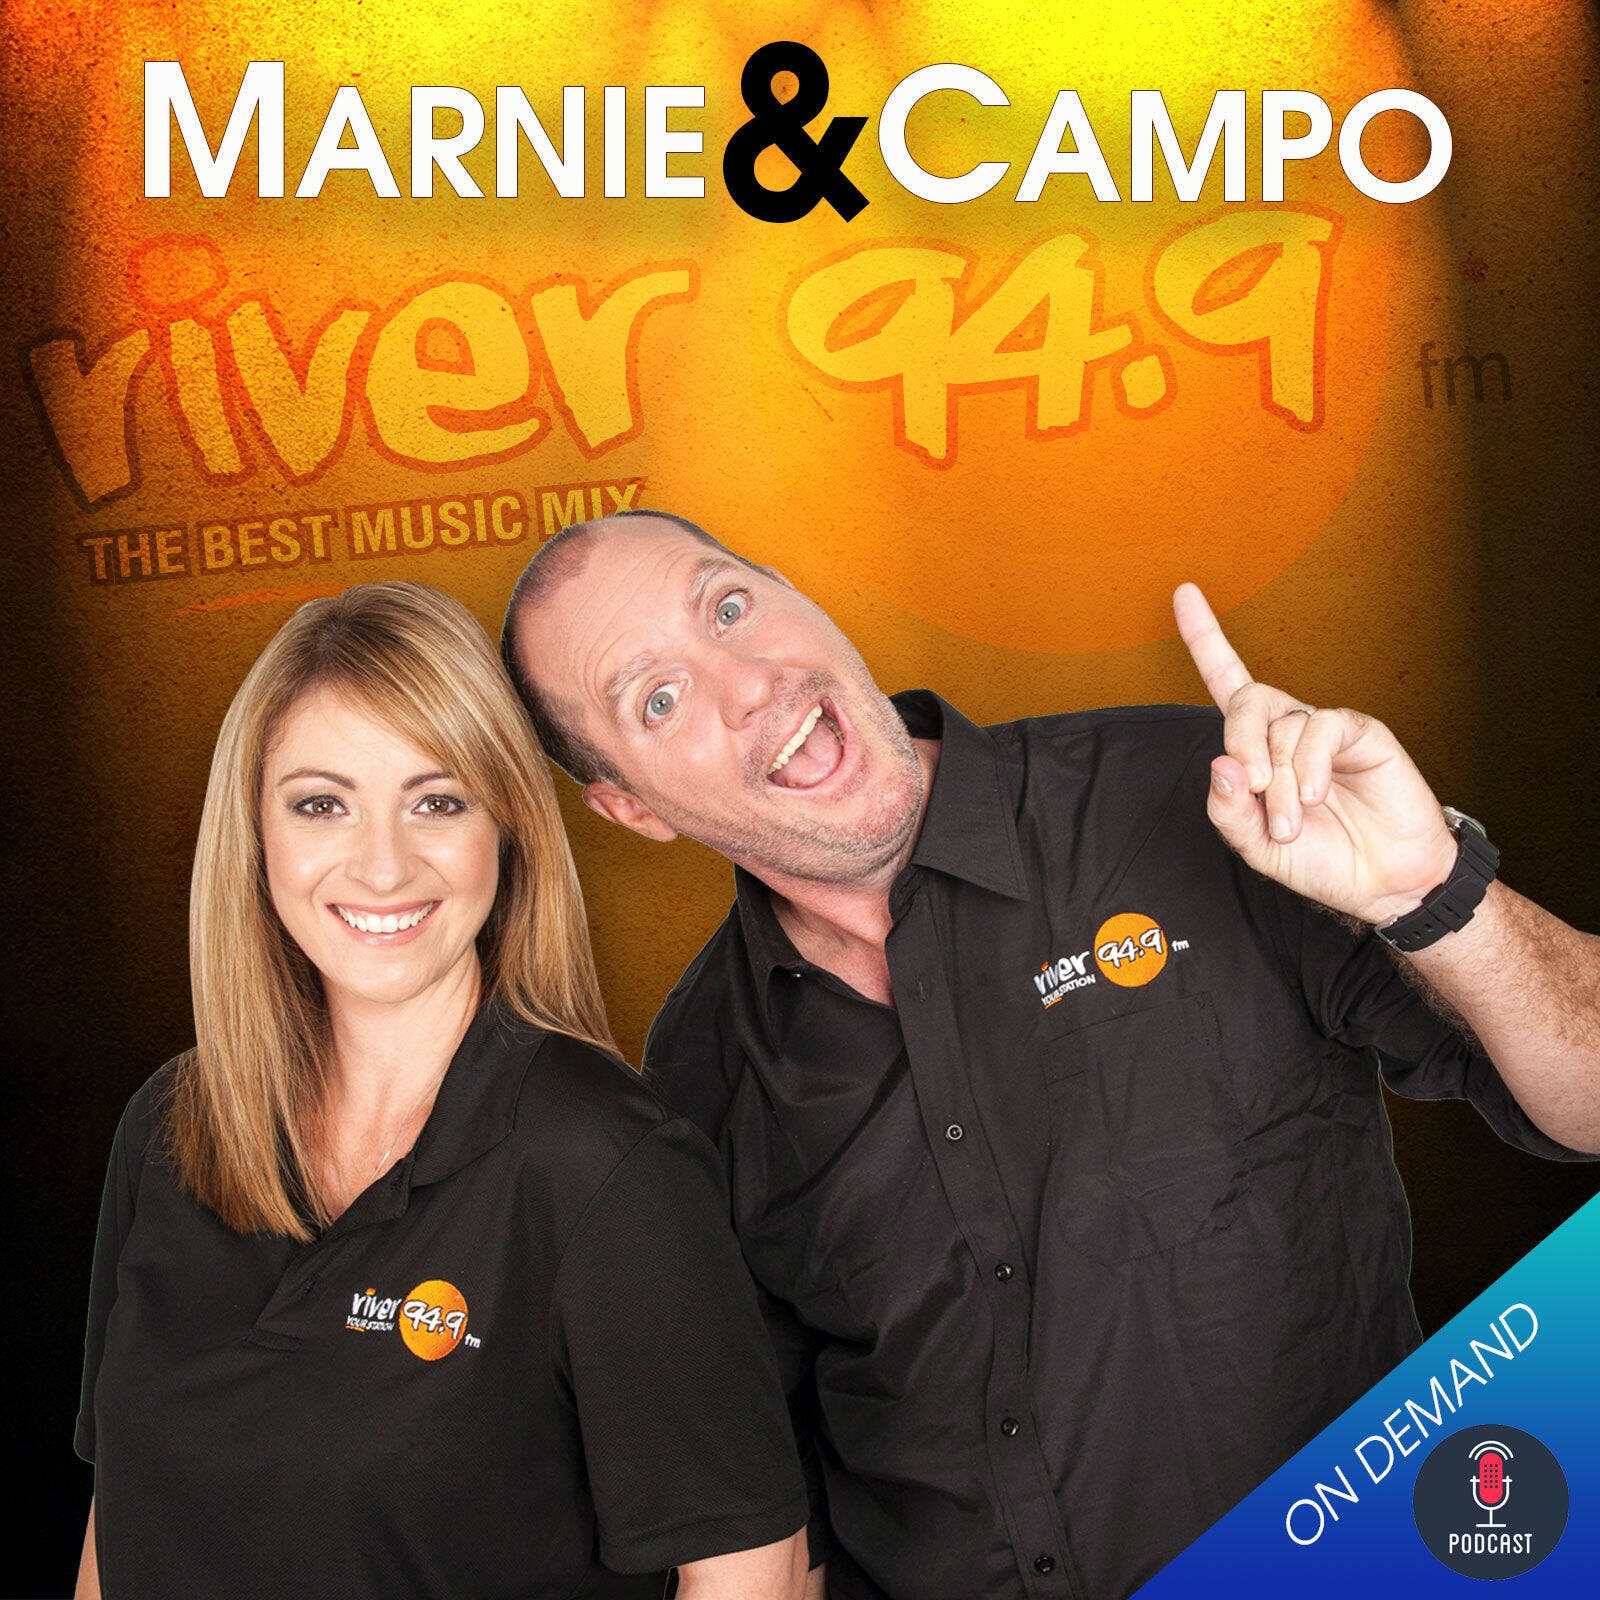 Nines Adam Jackson joined Marnie and Campo live from day 1 in the Maroons Camp